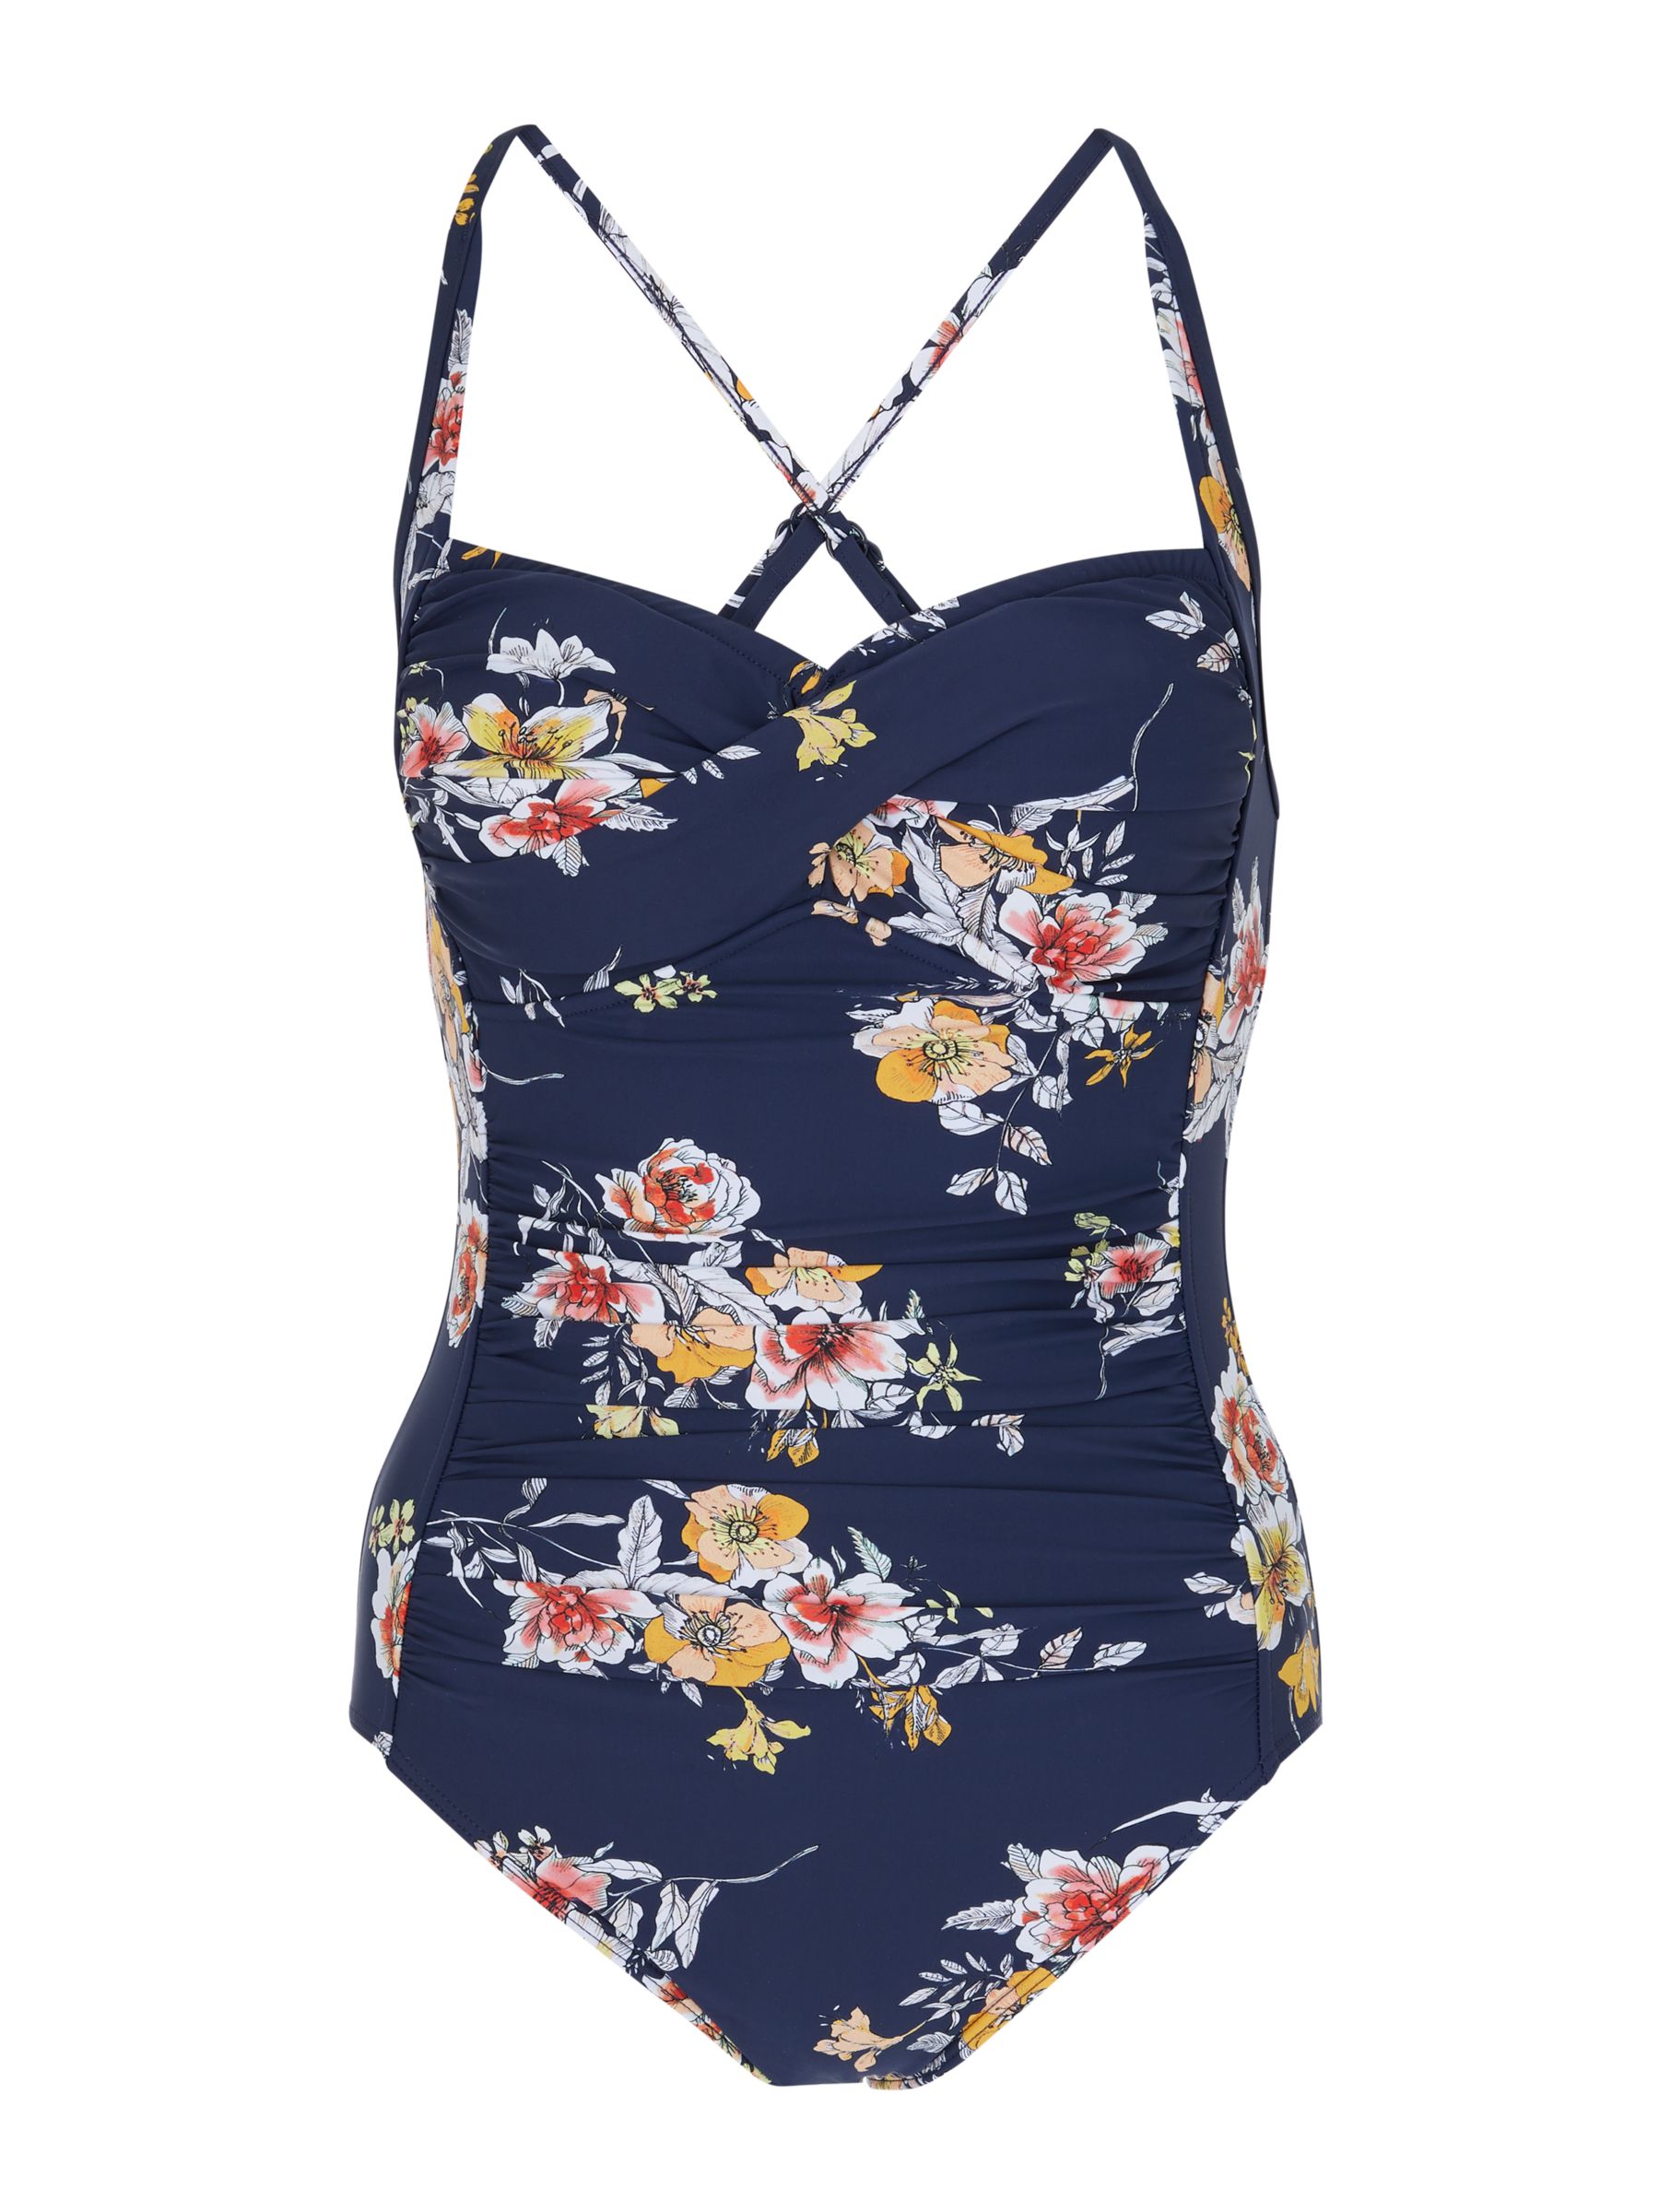 Seafolly Midsummer Floral Swimsuit, Blue/Multi at John Lewis & Partners